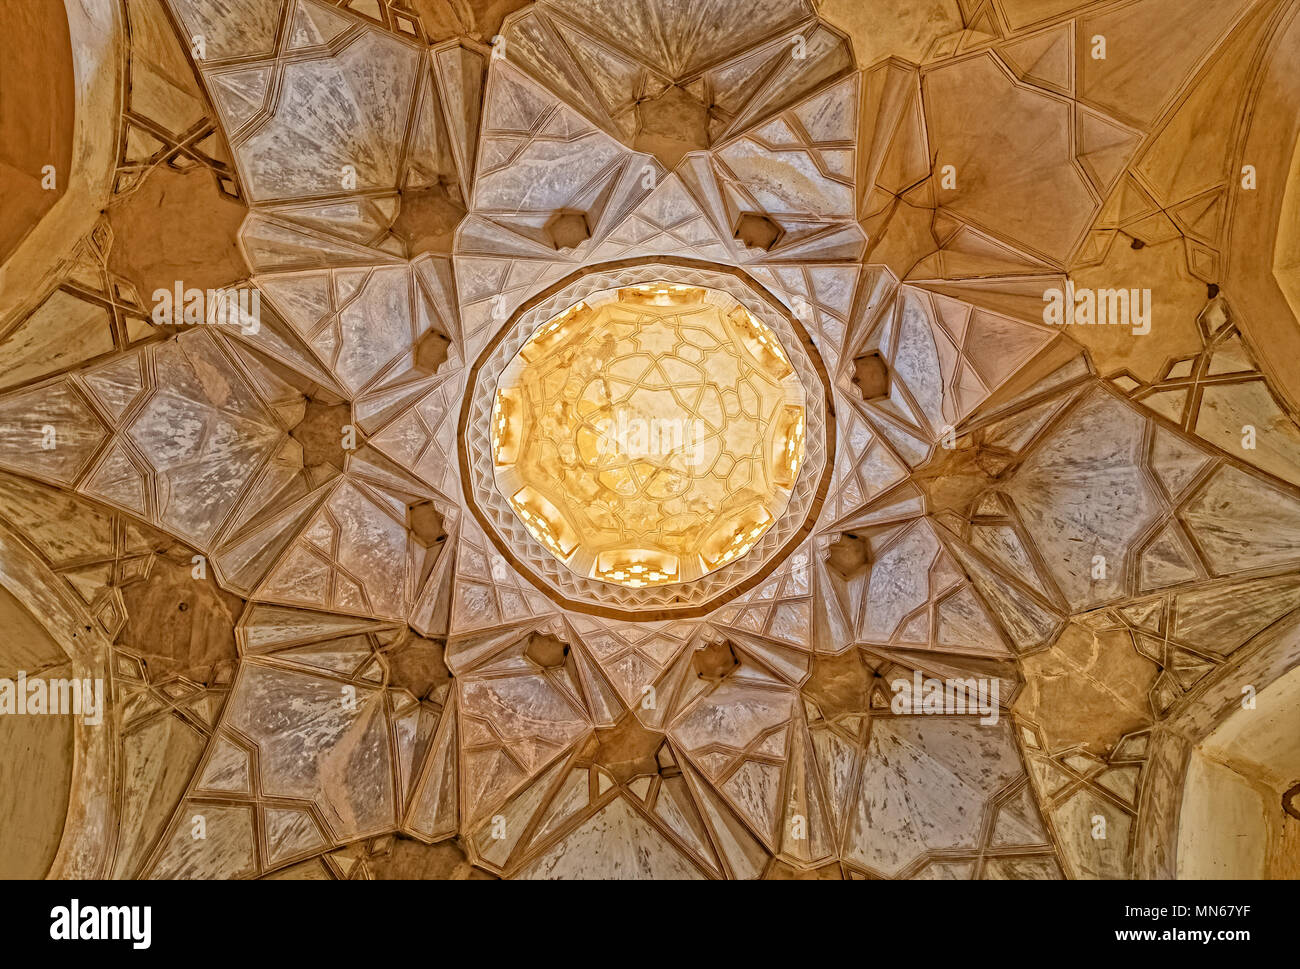 Nain old mosque ceiling Stock Photo